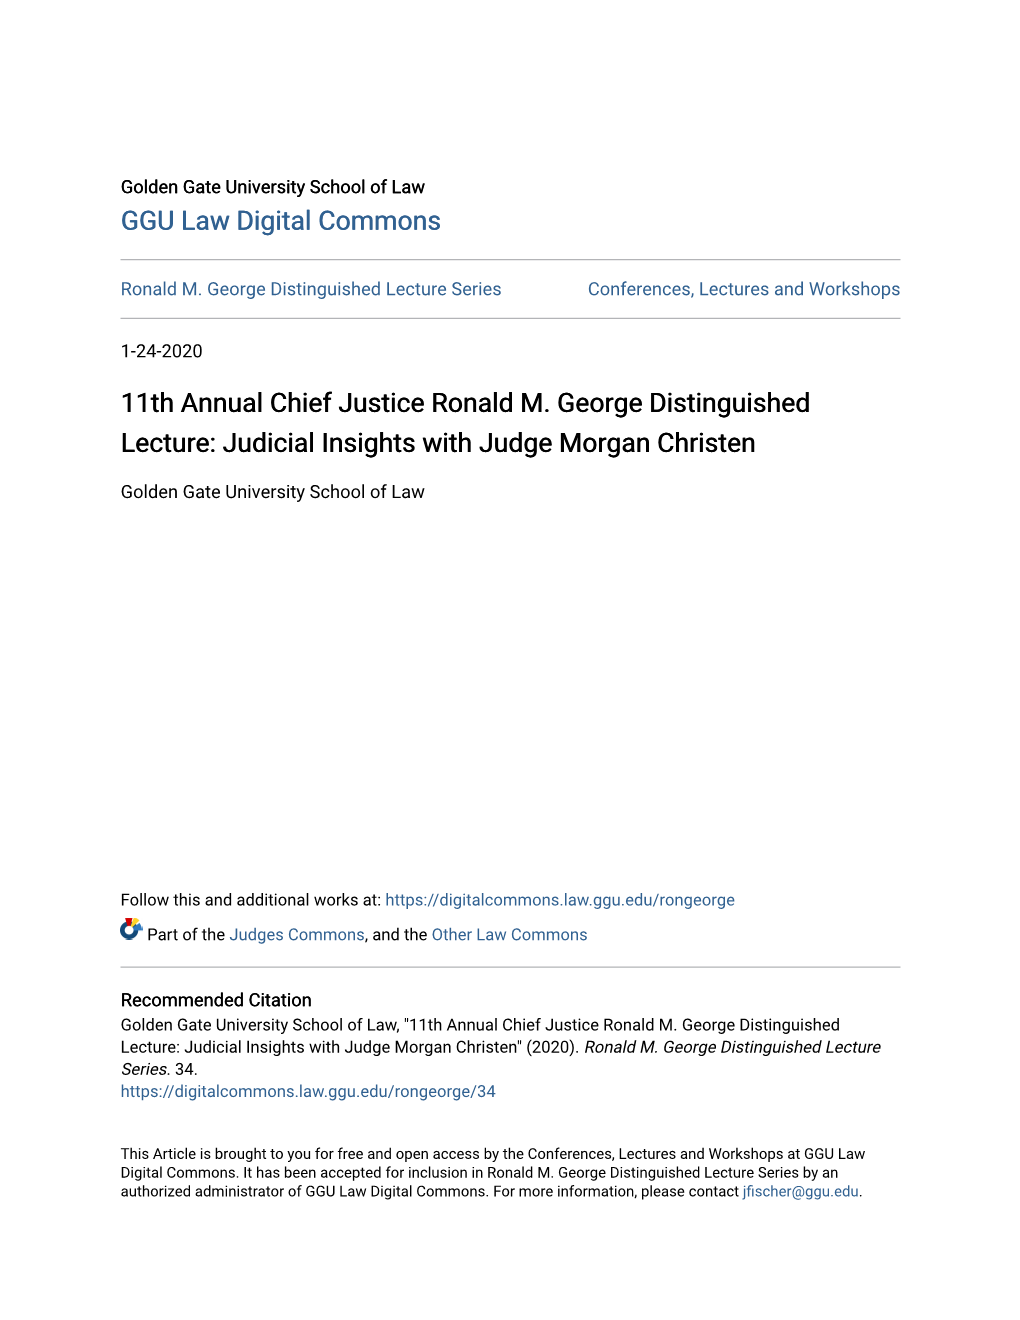 11Th Annual Chief Justice Ronald M. George Distinguished Lecture: Judicial Insights with Judge Morgan Christen